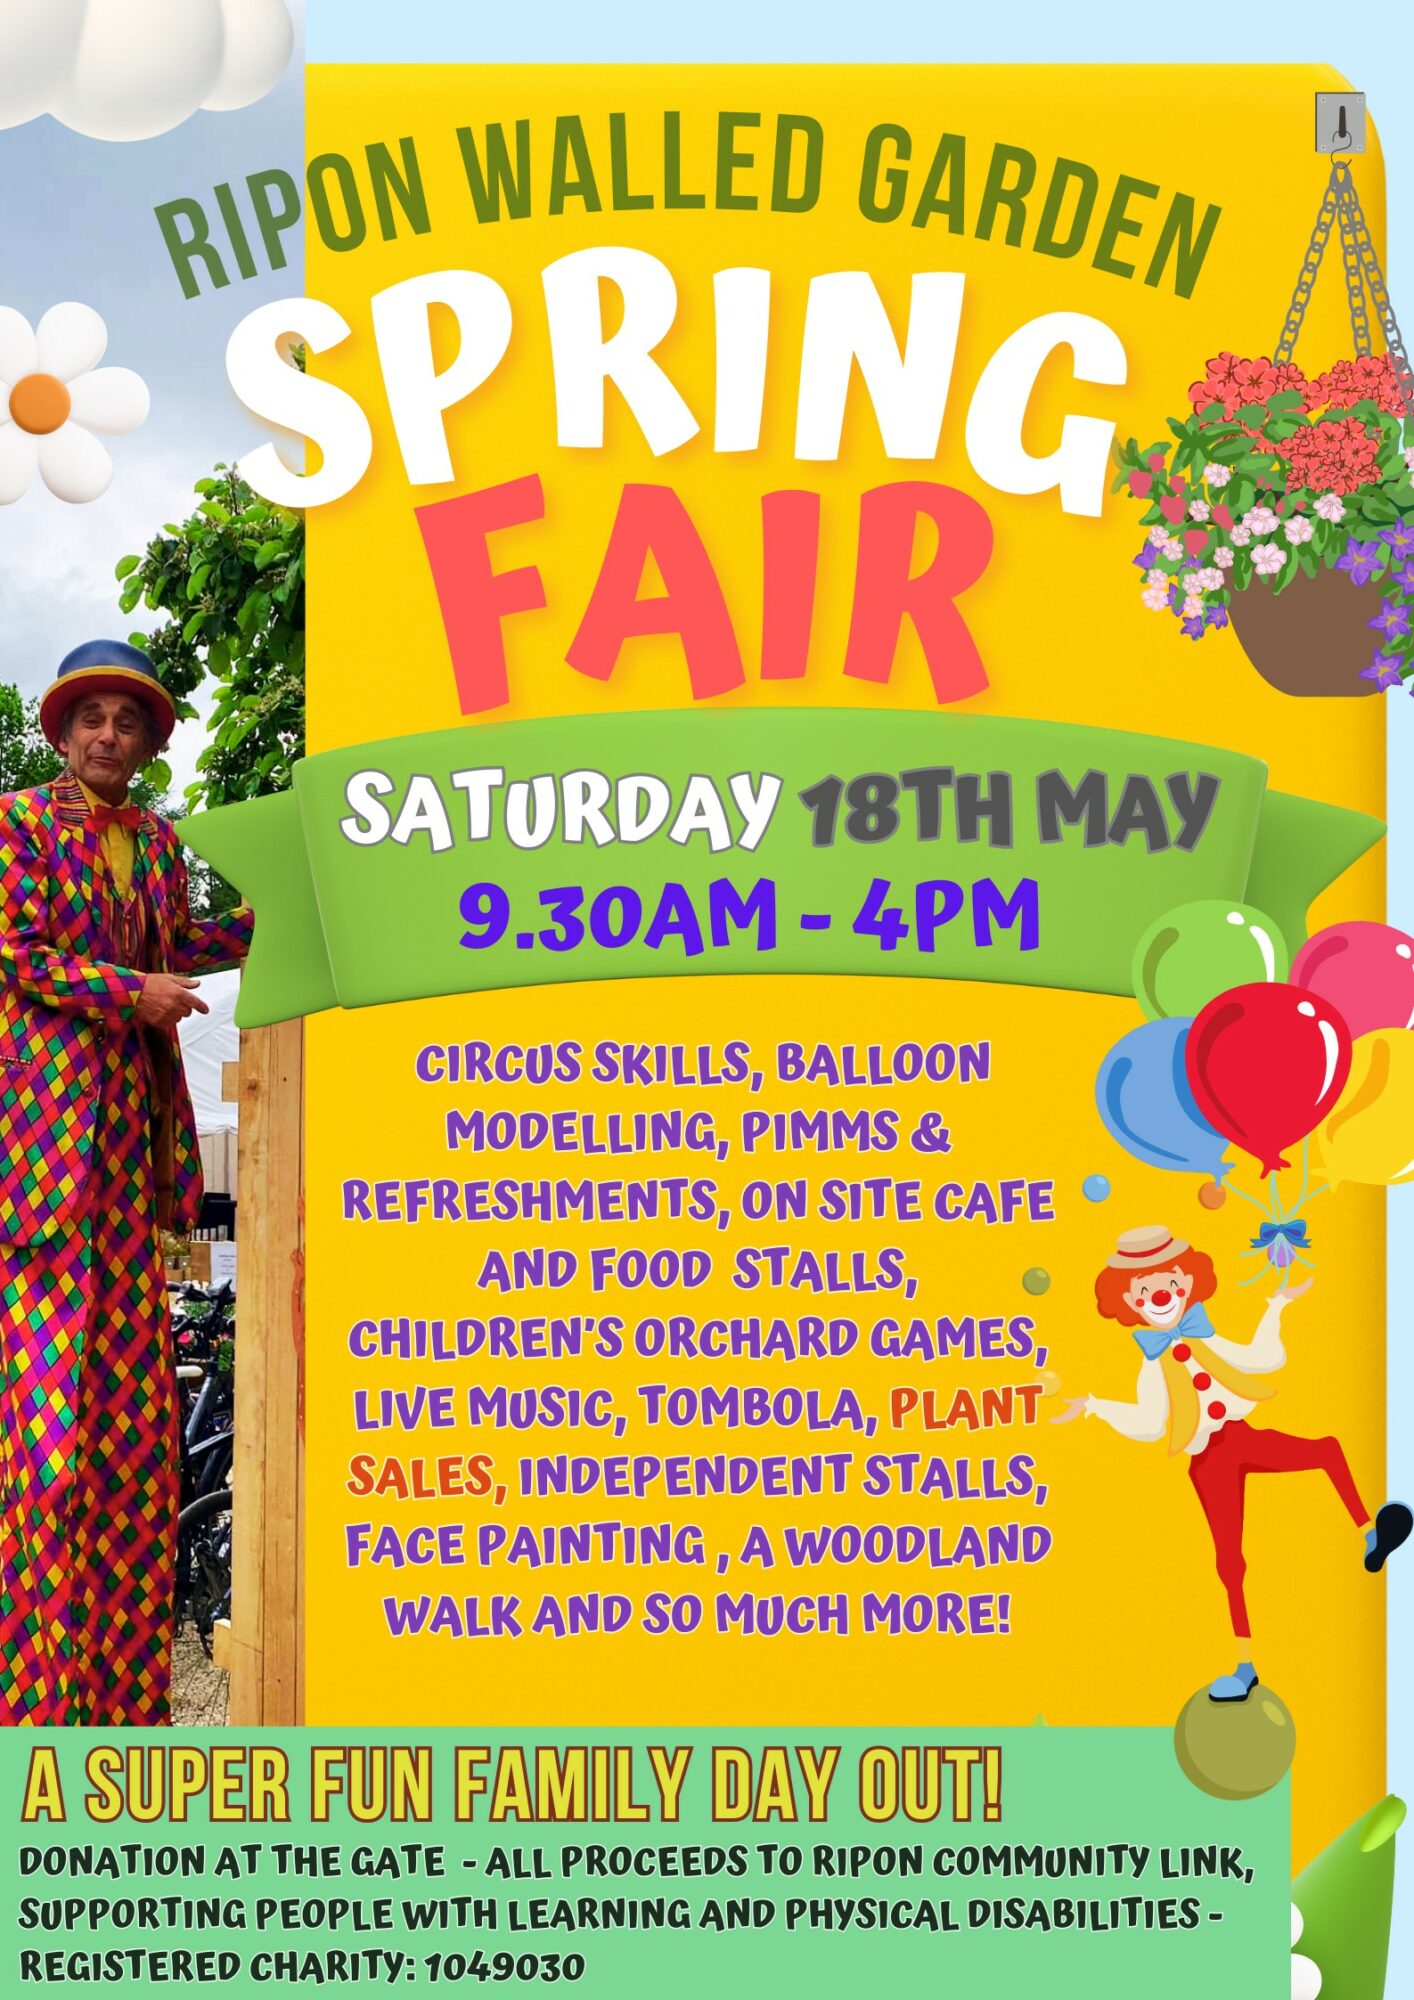 Image name spring fair poster final the 36 image from the post Events in Yorkshire.com.